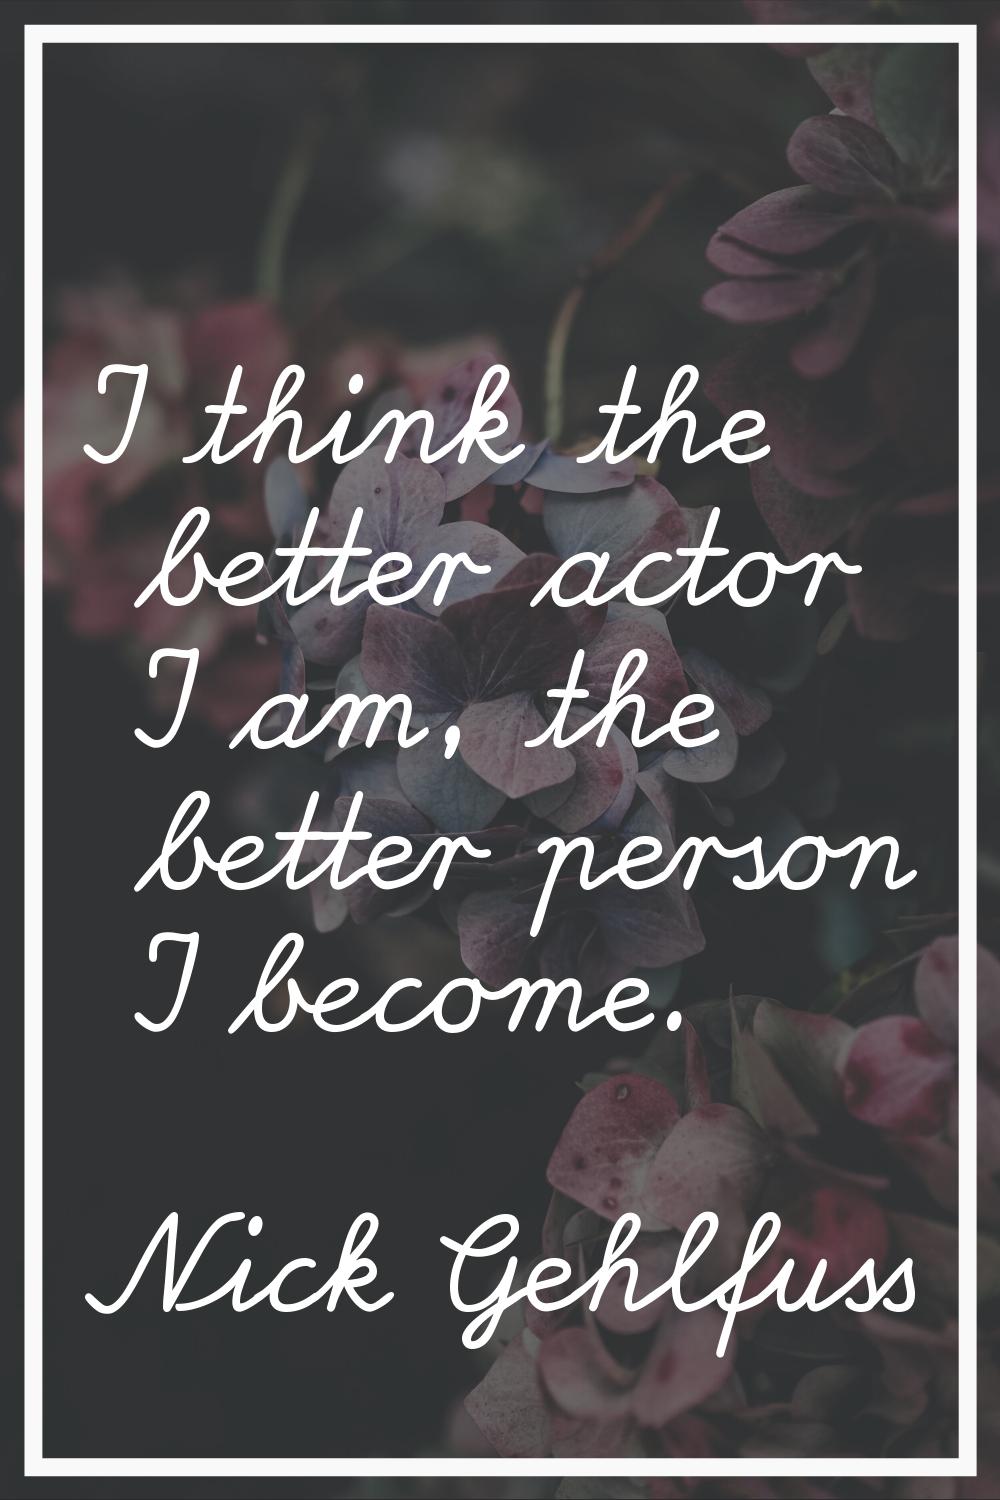 I think the better actor I am, the better person I become.